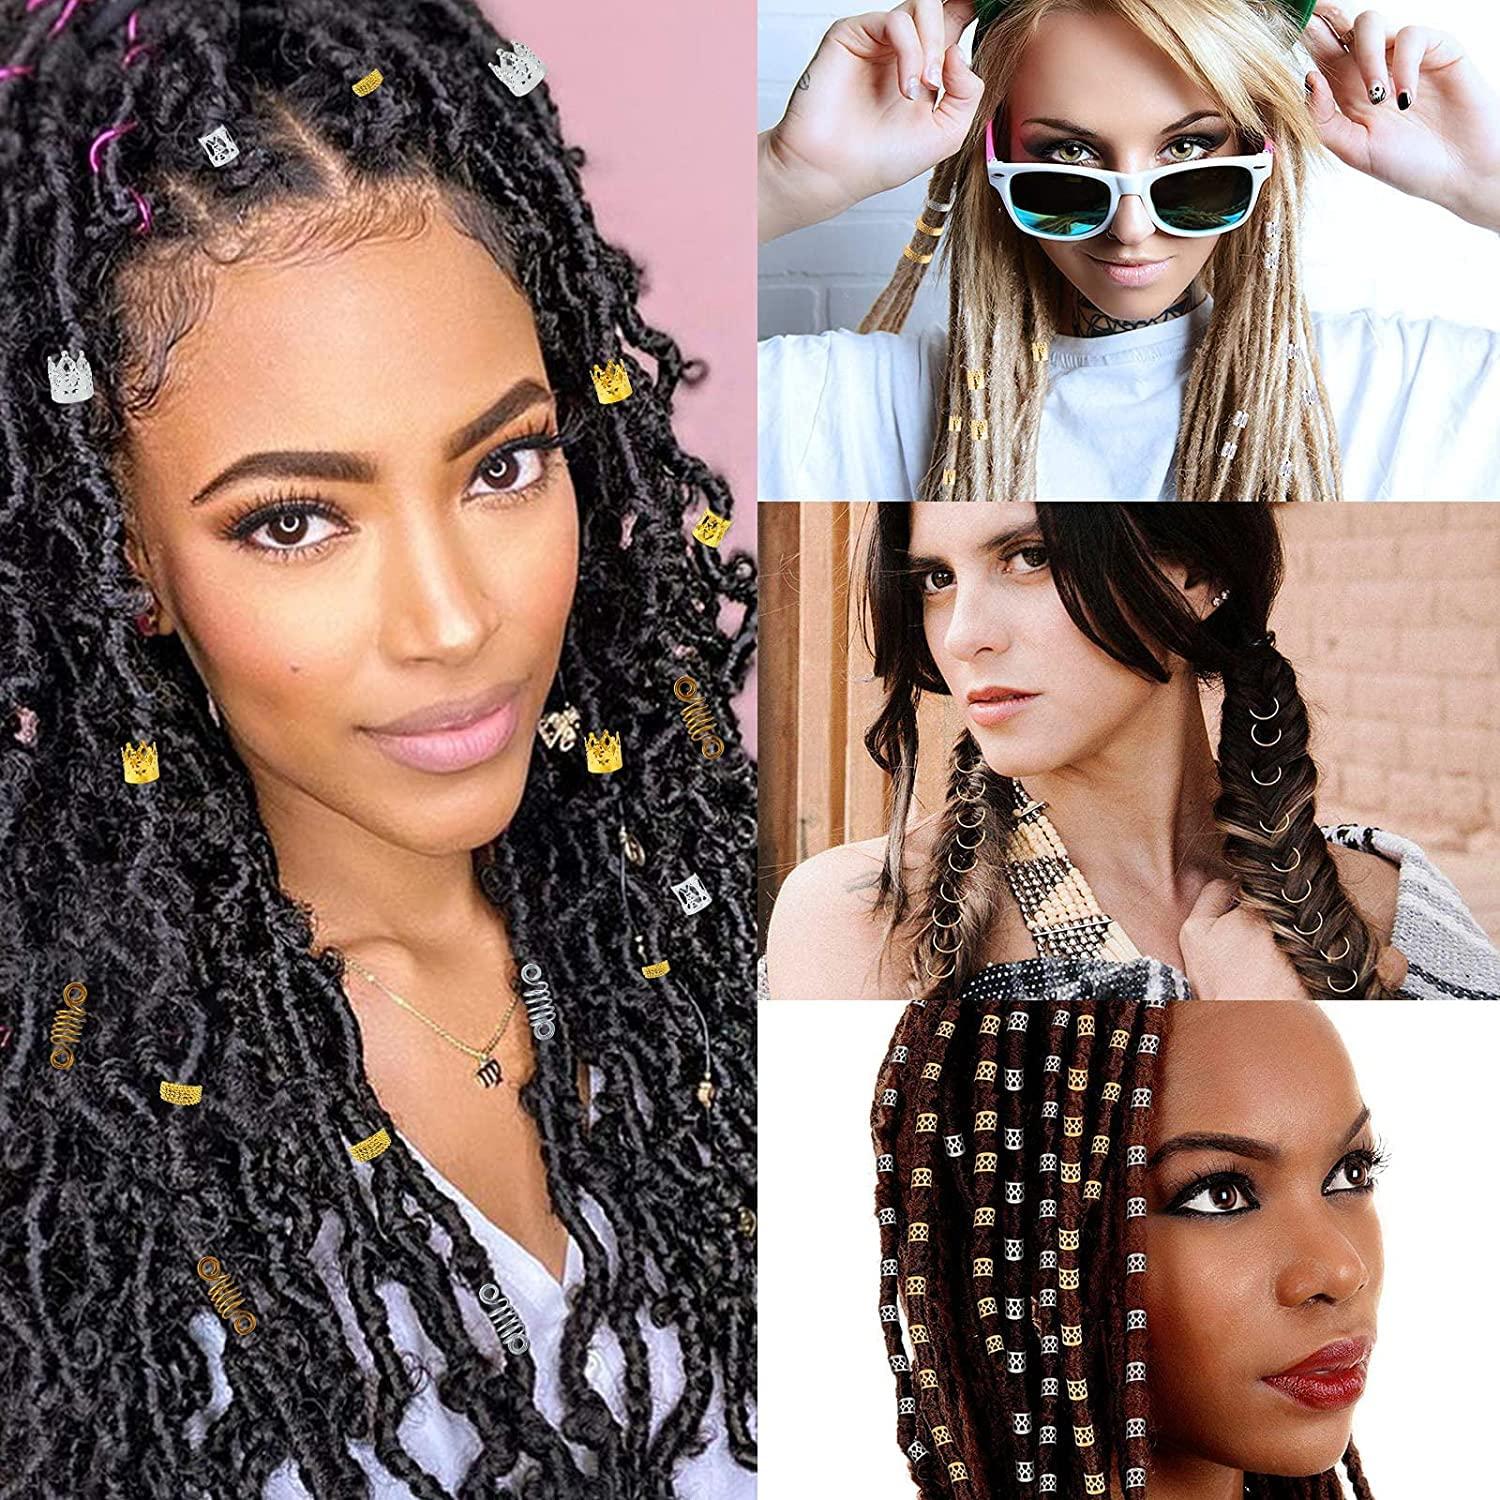 Nafaboig 200PCS Beads for Hair Braids, Hair Jewelry for Women Braids, Metal  Gold Braids Rings Cuffs Clips for Dreadlock Accessories Hair Decorations